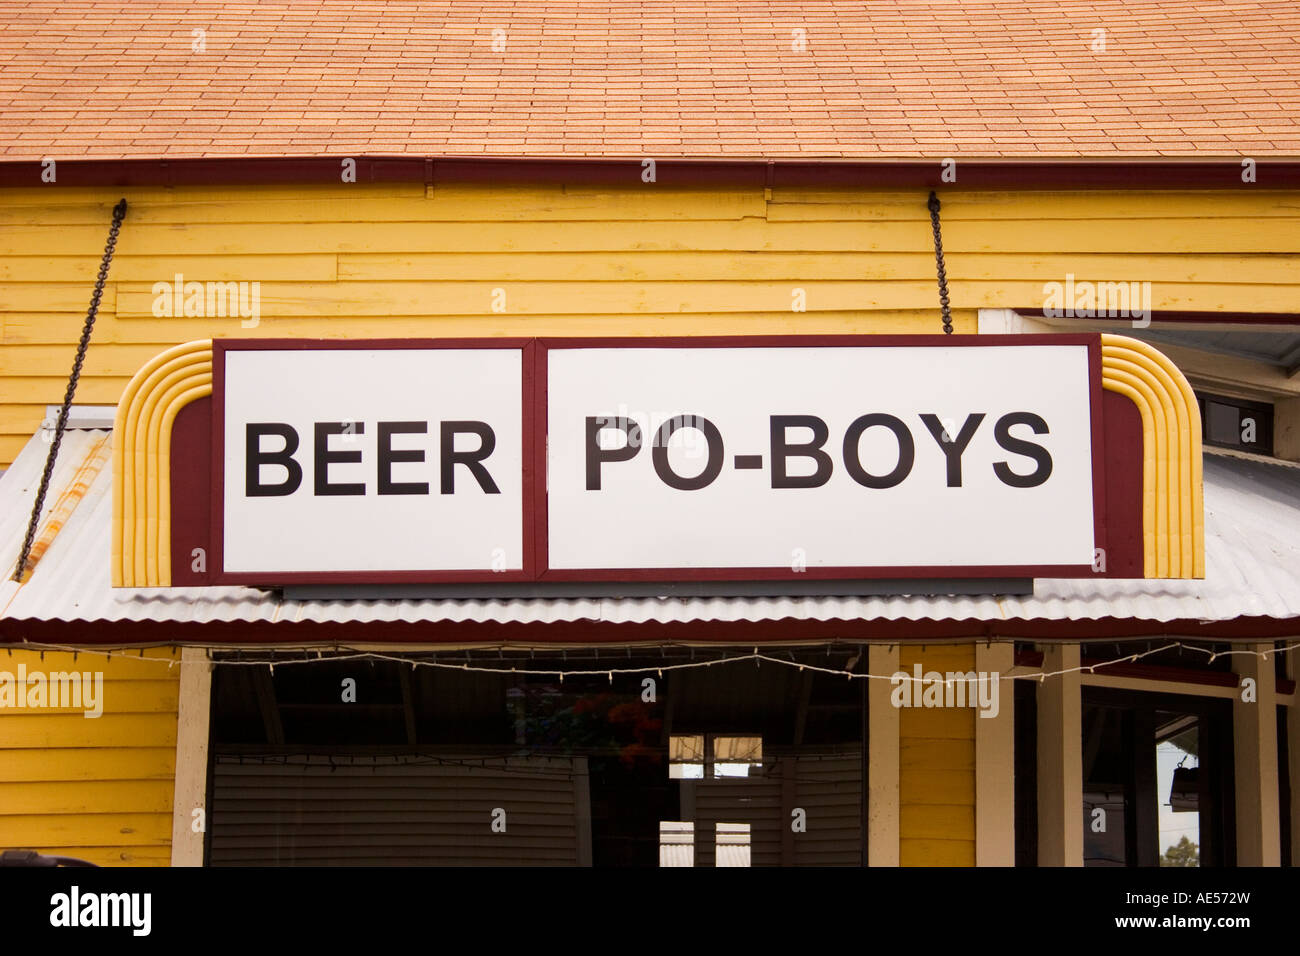 Beer and po-boys signs in New Orleans, LA, USA. Stock Photo